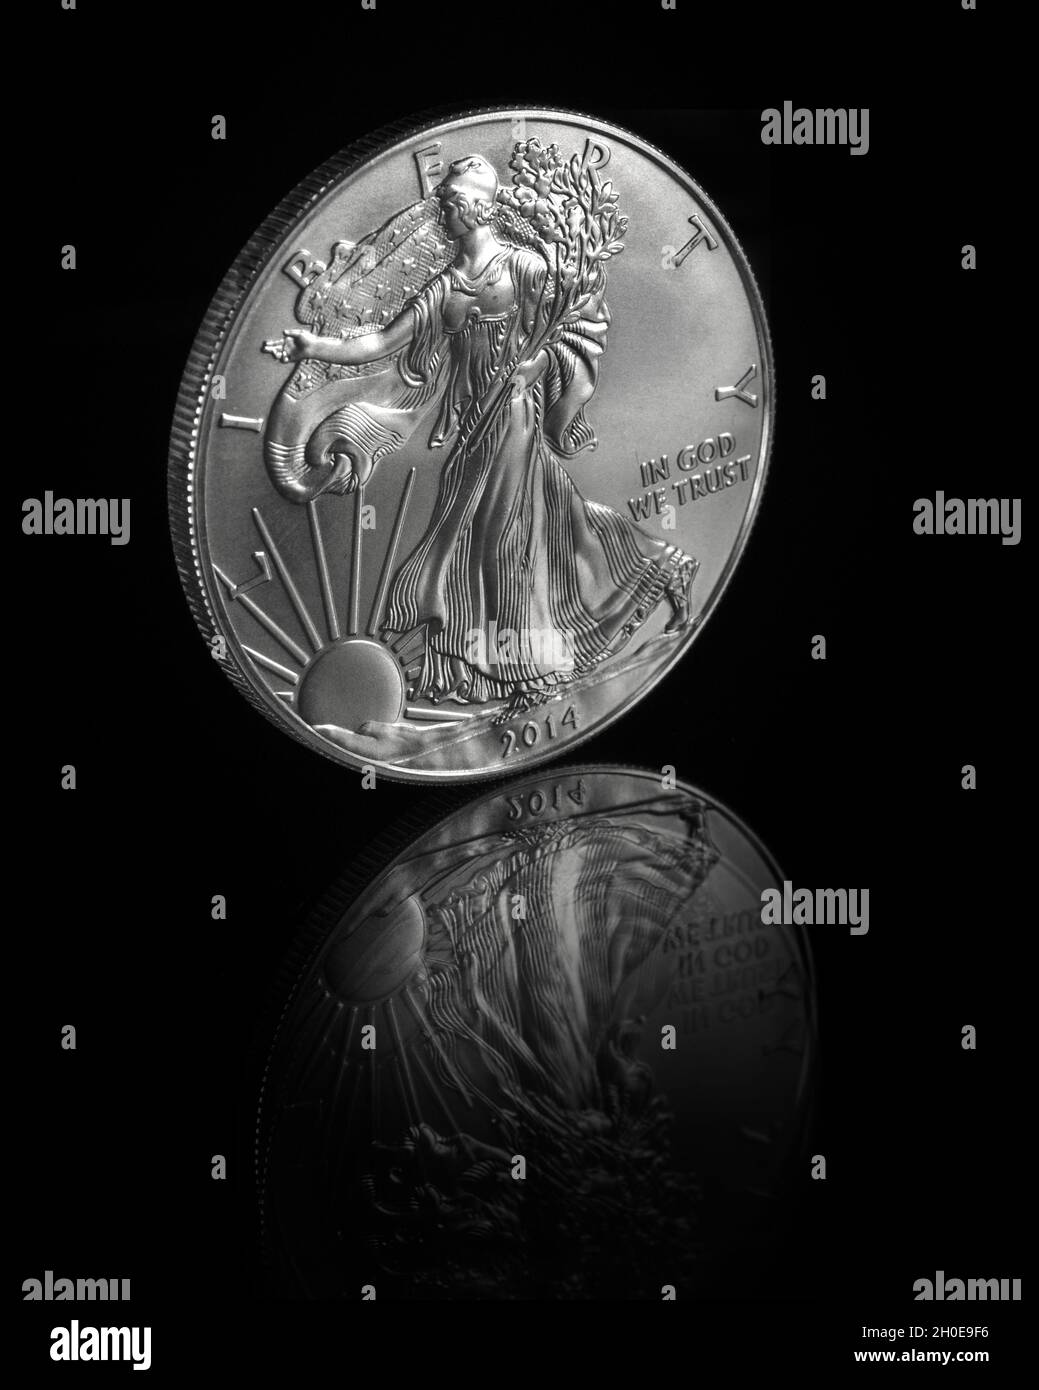 2014 United States Of America - 1 Troy Ounce Silver Eagle - .999 Fine Silver Coin - US Mint Stock Photo